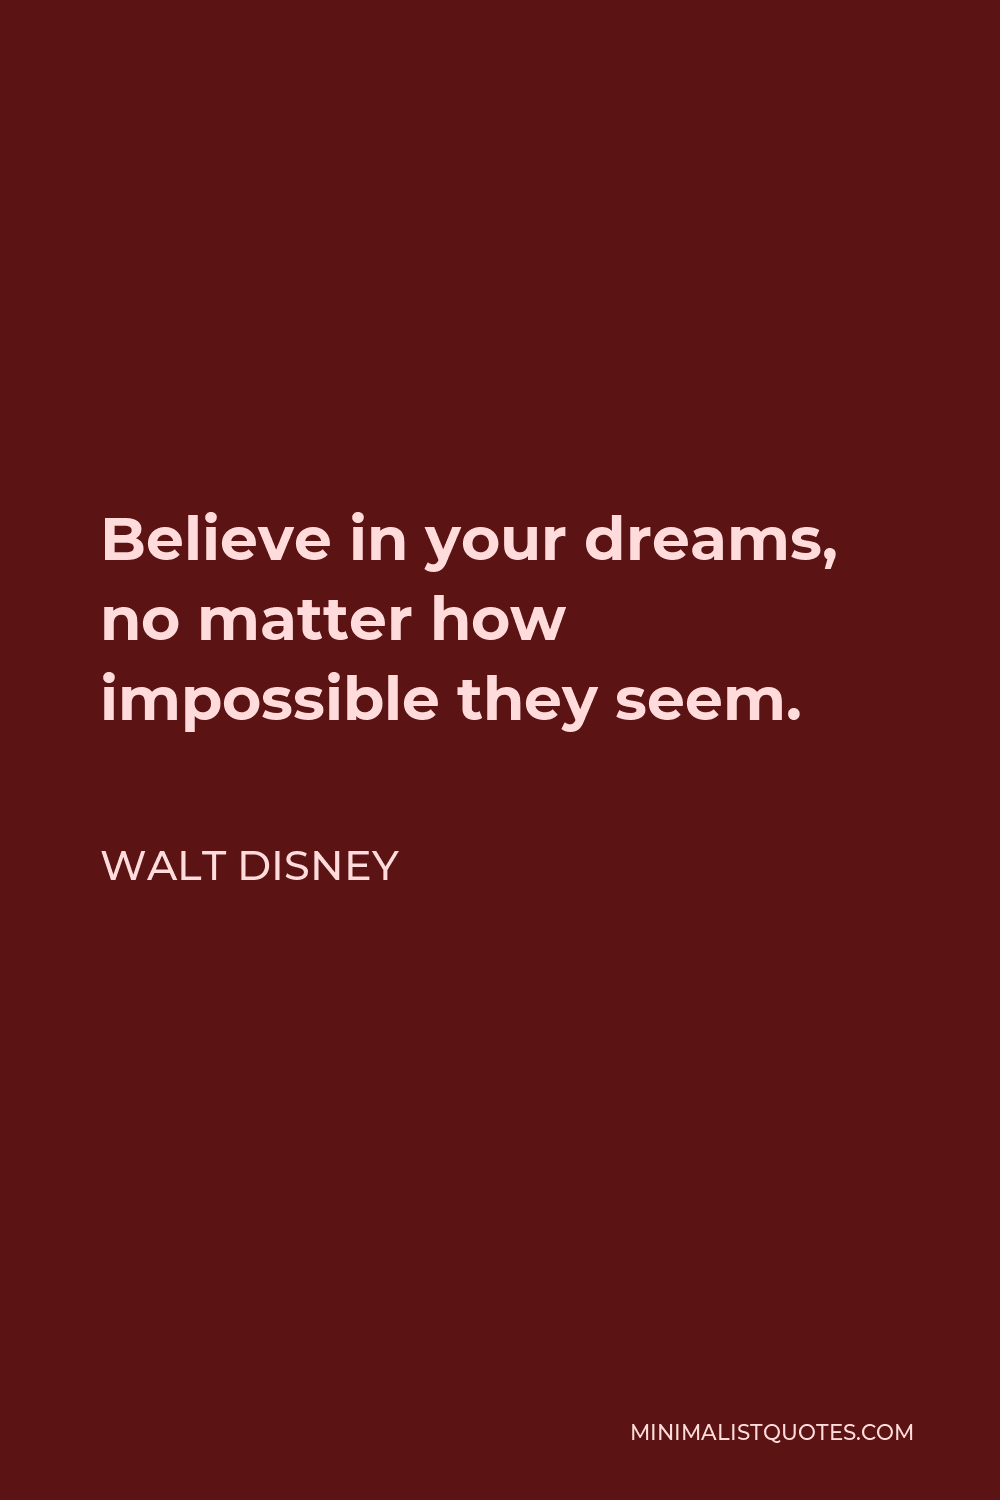 Walt Disney Quote - Believe in your dreams, no matter how impossible they seem.